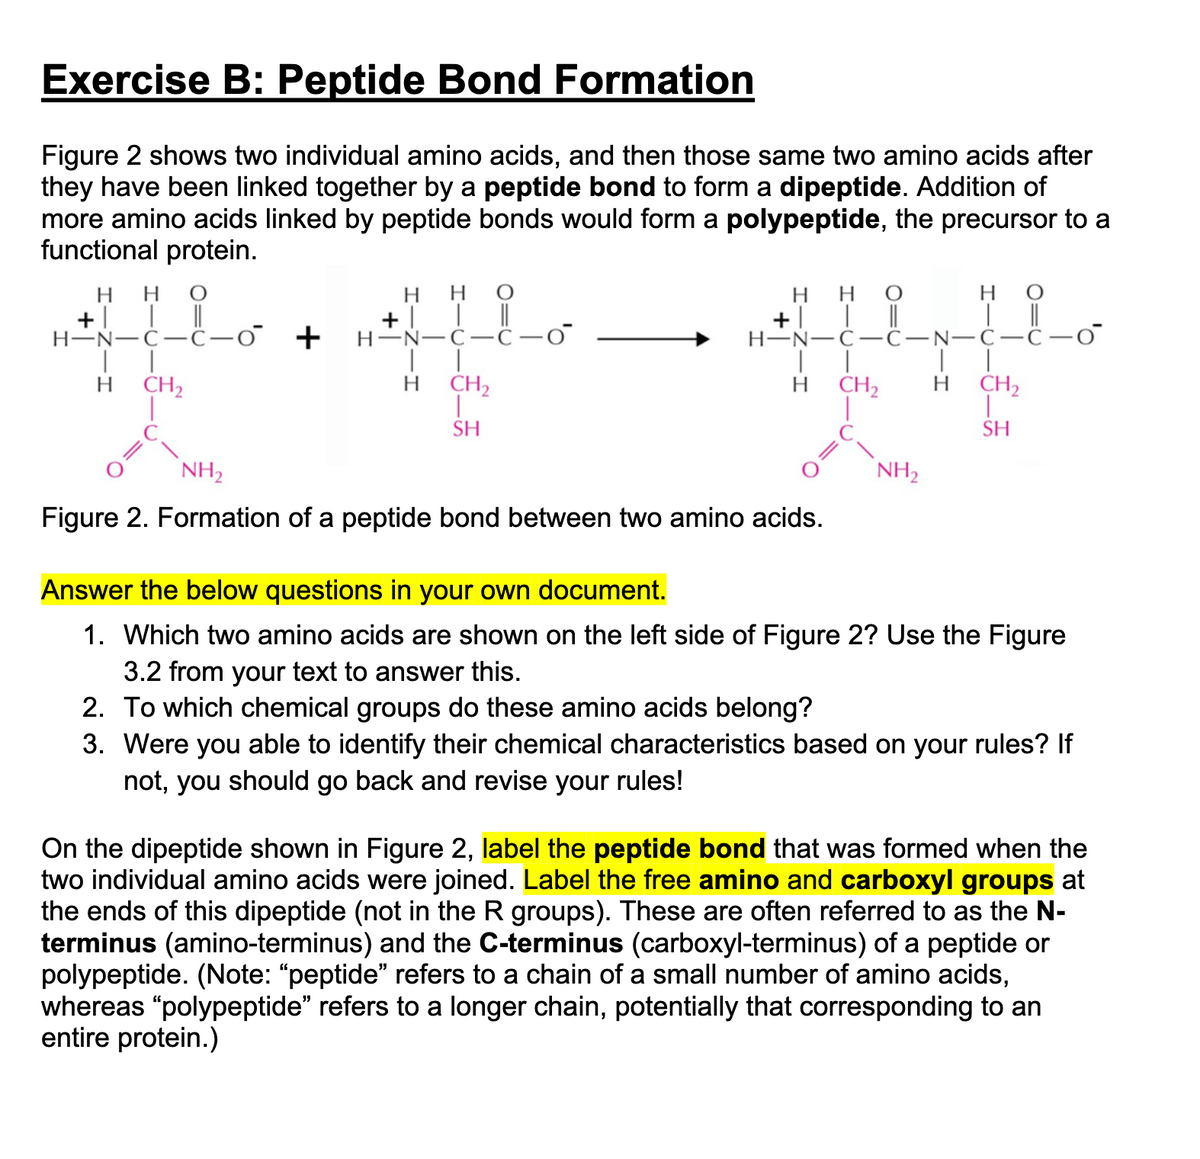 Exercise B: Peptide Bond Formation
Figure 2 shows two individual amino acids, and then those same two amino acids after
they have been linked together by a peptide bond to form a dipeptide. Addition of
more amino acids linked by peptide bonds would form a polypeptide, the precursor to a
functional protein.
нн
+| | ||
H-N-C-Ĉ-0
H.
+! | ||
H-N-C-ċ –0
H.
H
H
H
+| | ||
H-N-C-C-N-C-C-
+
H
CH2
CH2
H
CH2
H.
CH2
SH
SH
NH,
NH,
Figure 2. Formation of a peptide bond between two amino acids.
Answer the below questions in your own document.
1. Which two amino acids are shown on the left side of Figure 2? Use the Figure
3.2 from your text to answer this.
2. To which chemical groups do these amino acids belong?
3. Were you able to identify their chemical characteristics based on your rules? If
not, you should go back and revise your rules!
On the dipeptide shown in Figure 2, label the peptide bond that was formed when the
two individual amino acids were joined. Label the free amino and carboxyl groups at
the ends of this dipeptide (not in the R groups). These are often referred to as the N-
terminus (amino-terminus) and the C-terminus (carboxyl-terminus) of a peptide or
polypeptide. (Note: "peptide" refers to a chain of a small number of amino acids,
whereas "polypeptide" refers to a longer chain, potentially that corresponding to an
entire protein.)
